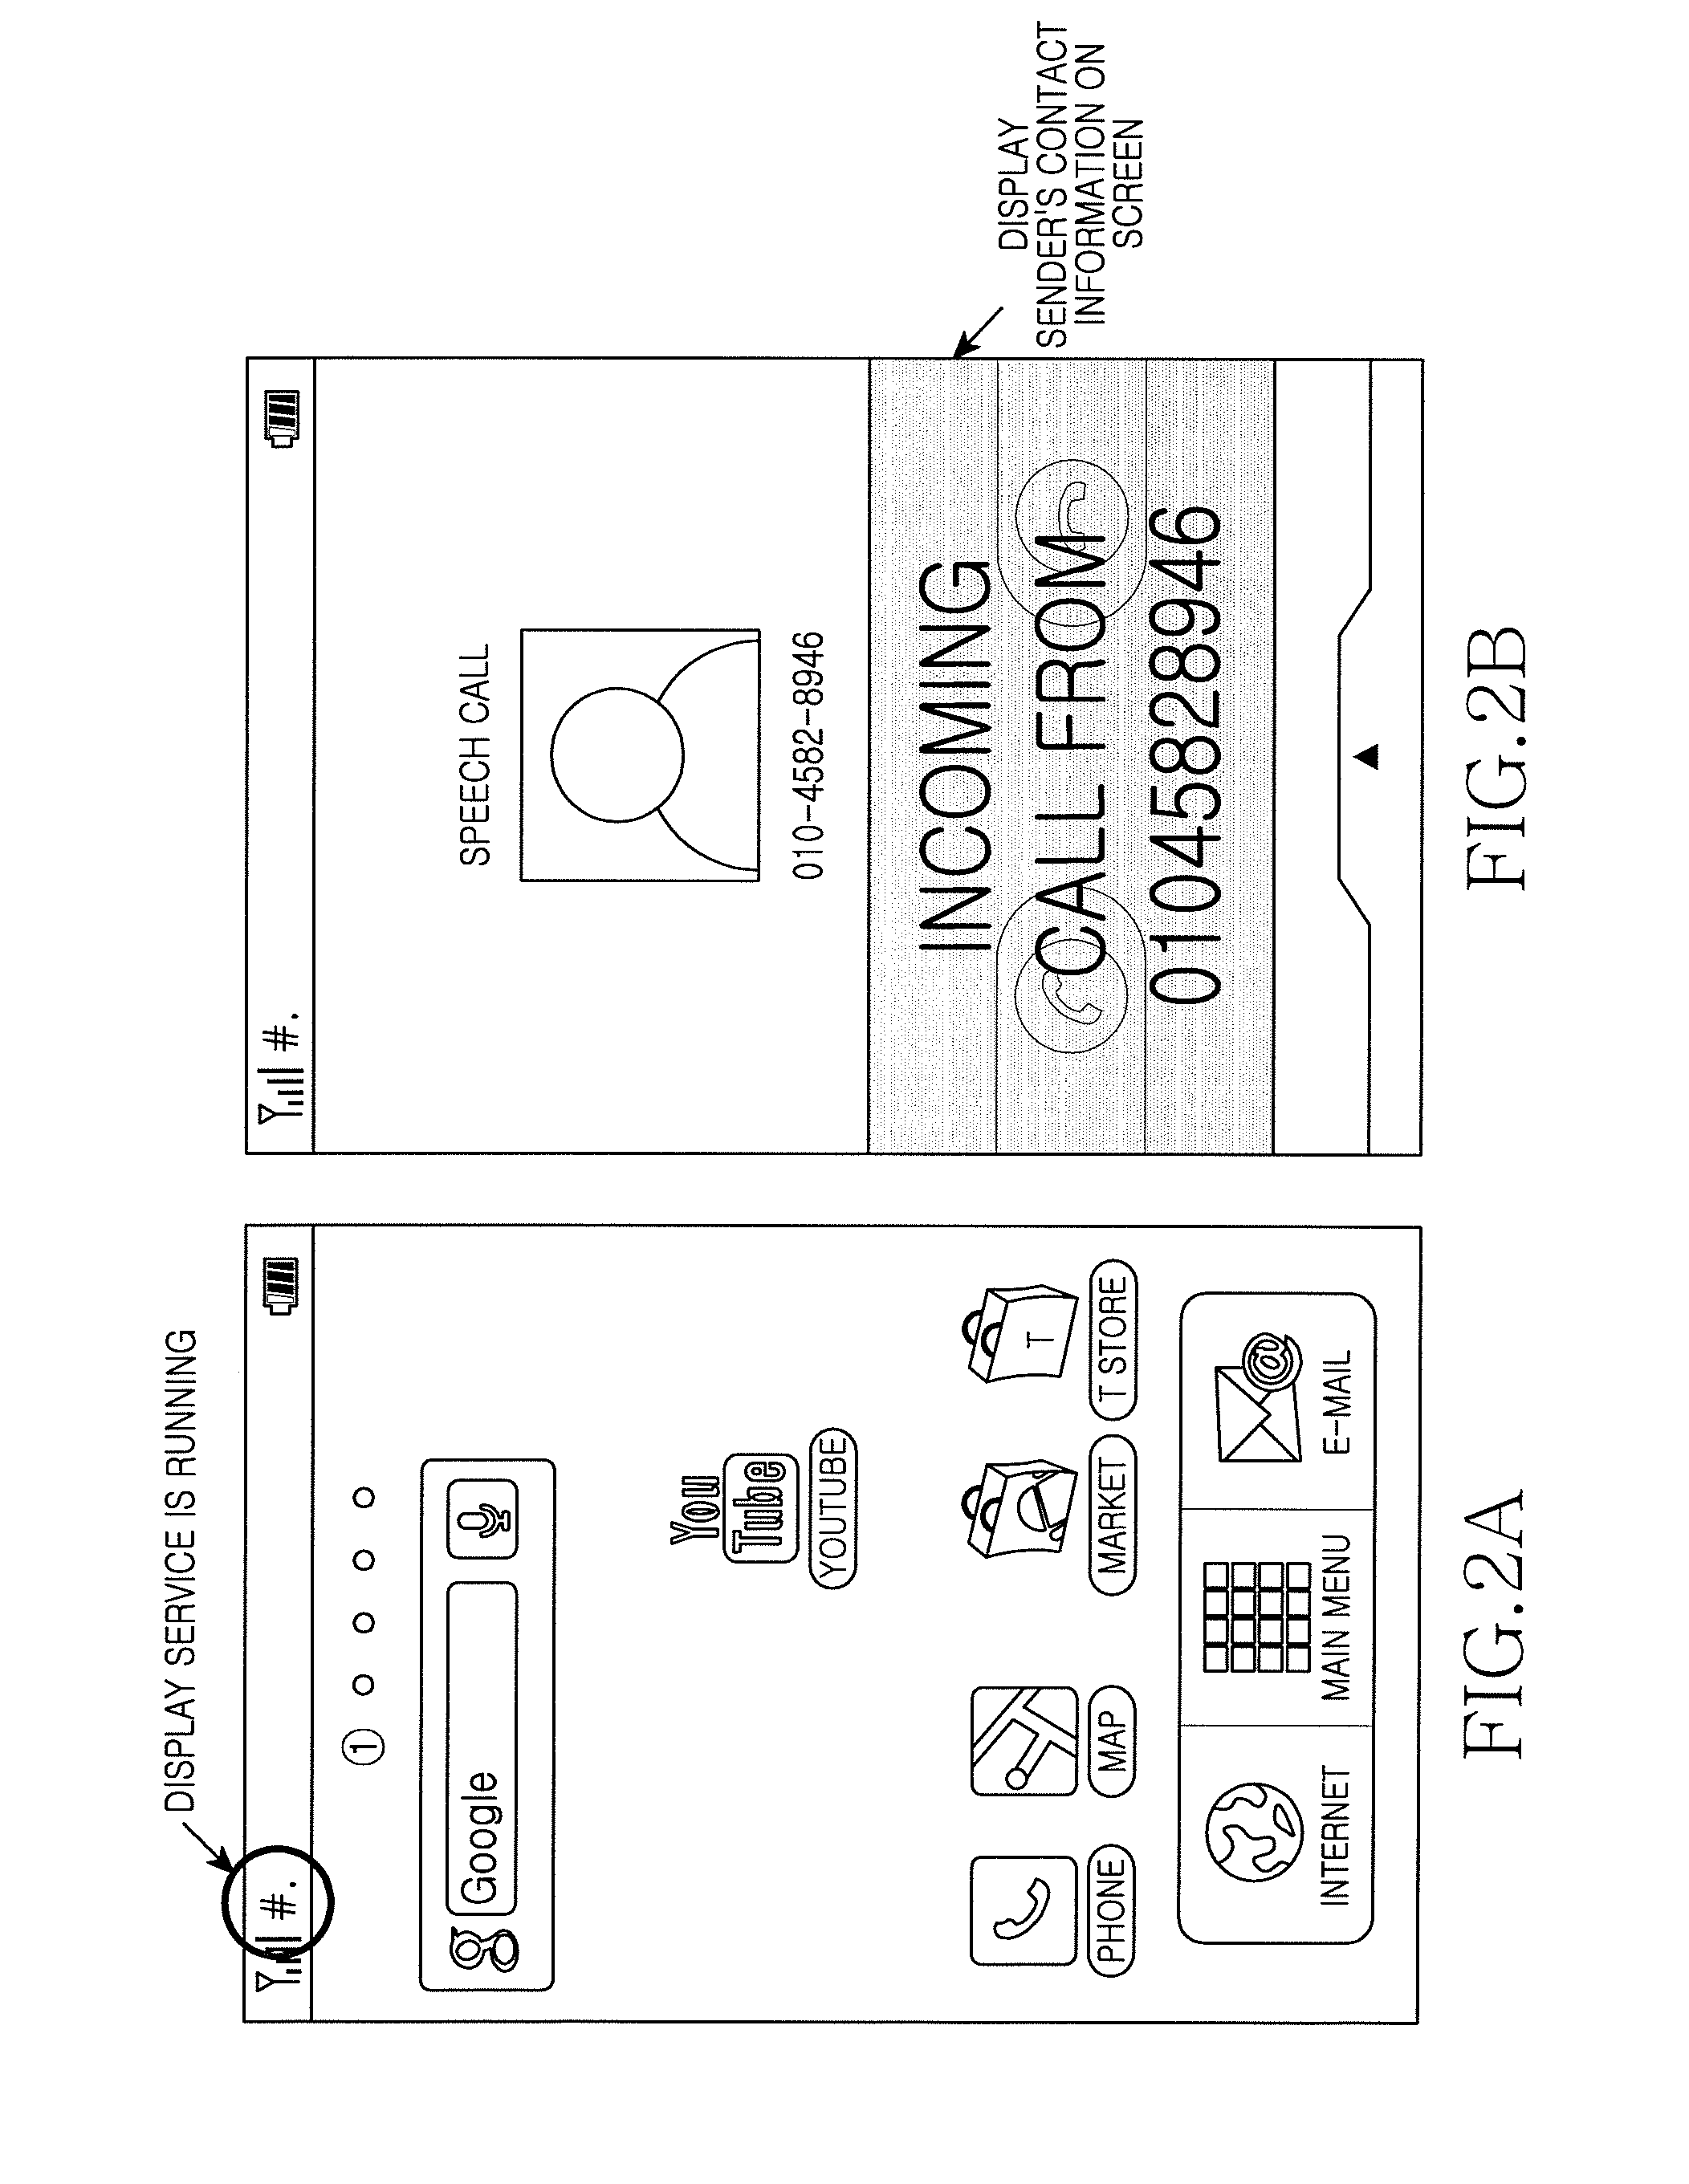 Apparatus and method for providing an interface in a device with touch screen